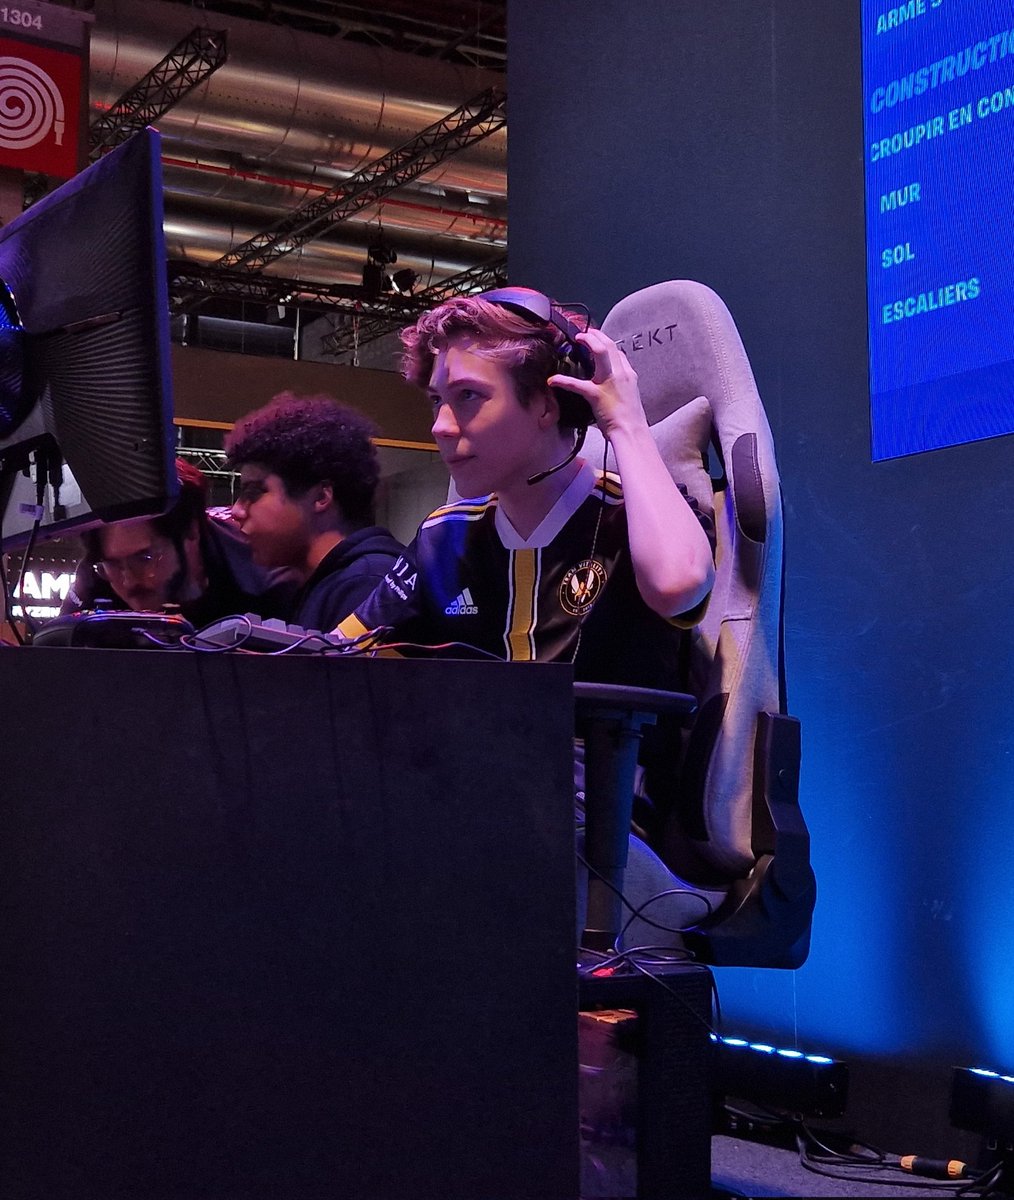 .@Snayzyy & @PodaSaiFN from @TeamVitality are currently playing Fortnite with audience members on stage at our booth 🐝  #JBLQuantumPGW #DareToDiveIn #VForVictory 